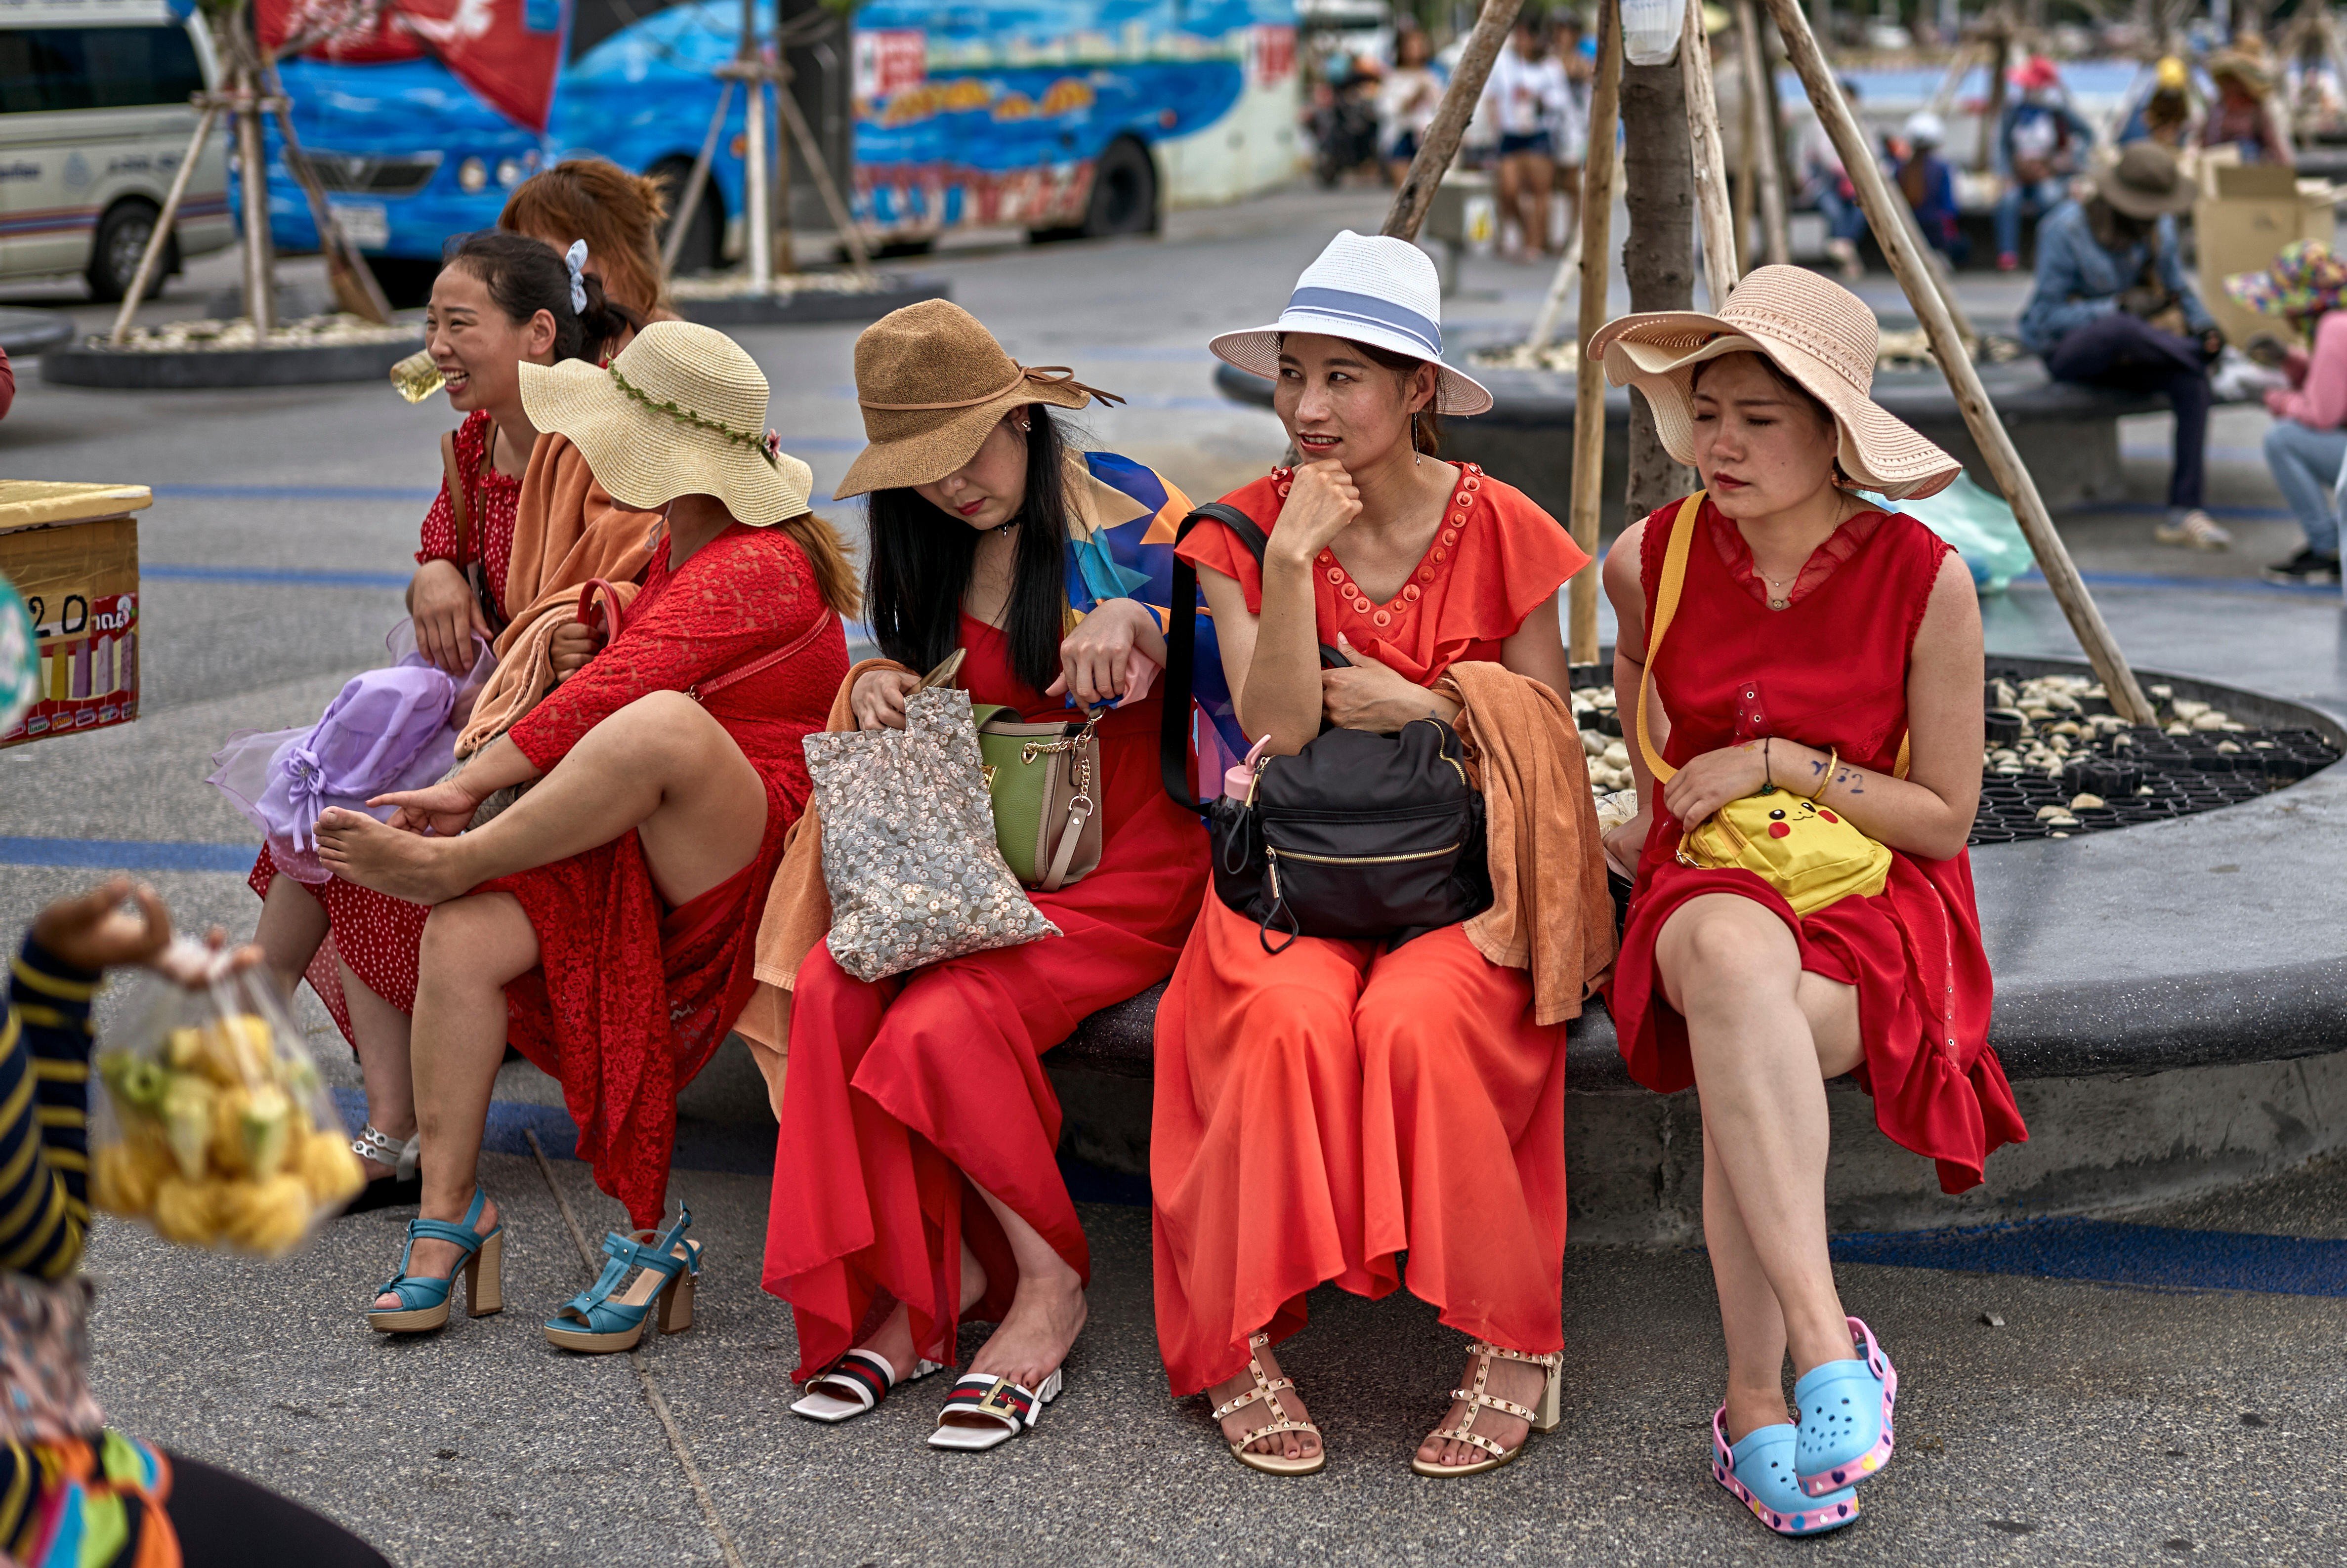 Chinese tourists face racial discrimination while travelling, writes Kevin Chong. Photo: Alamy